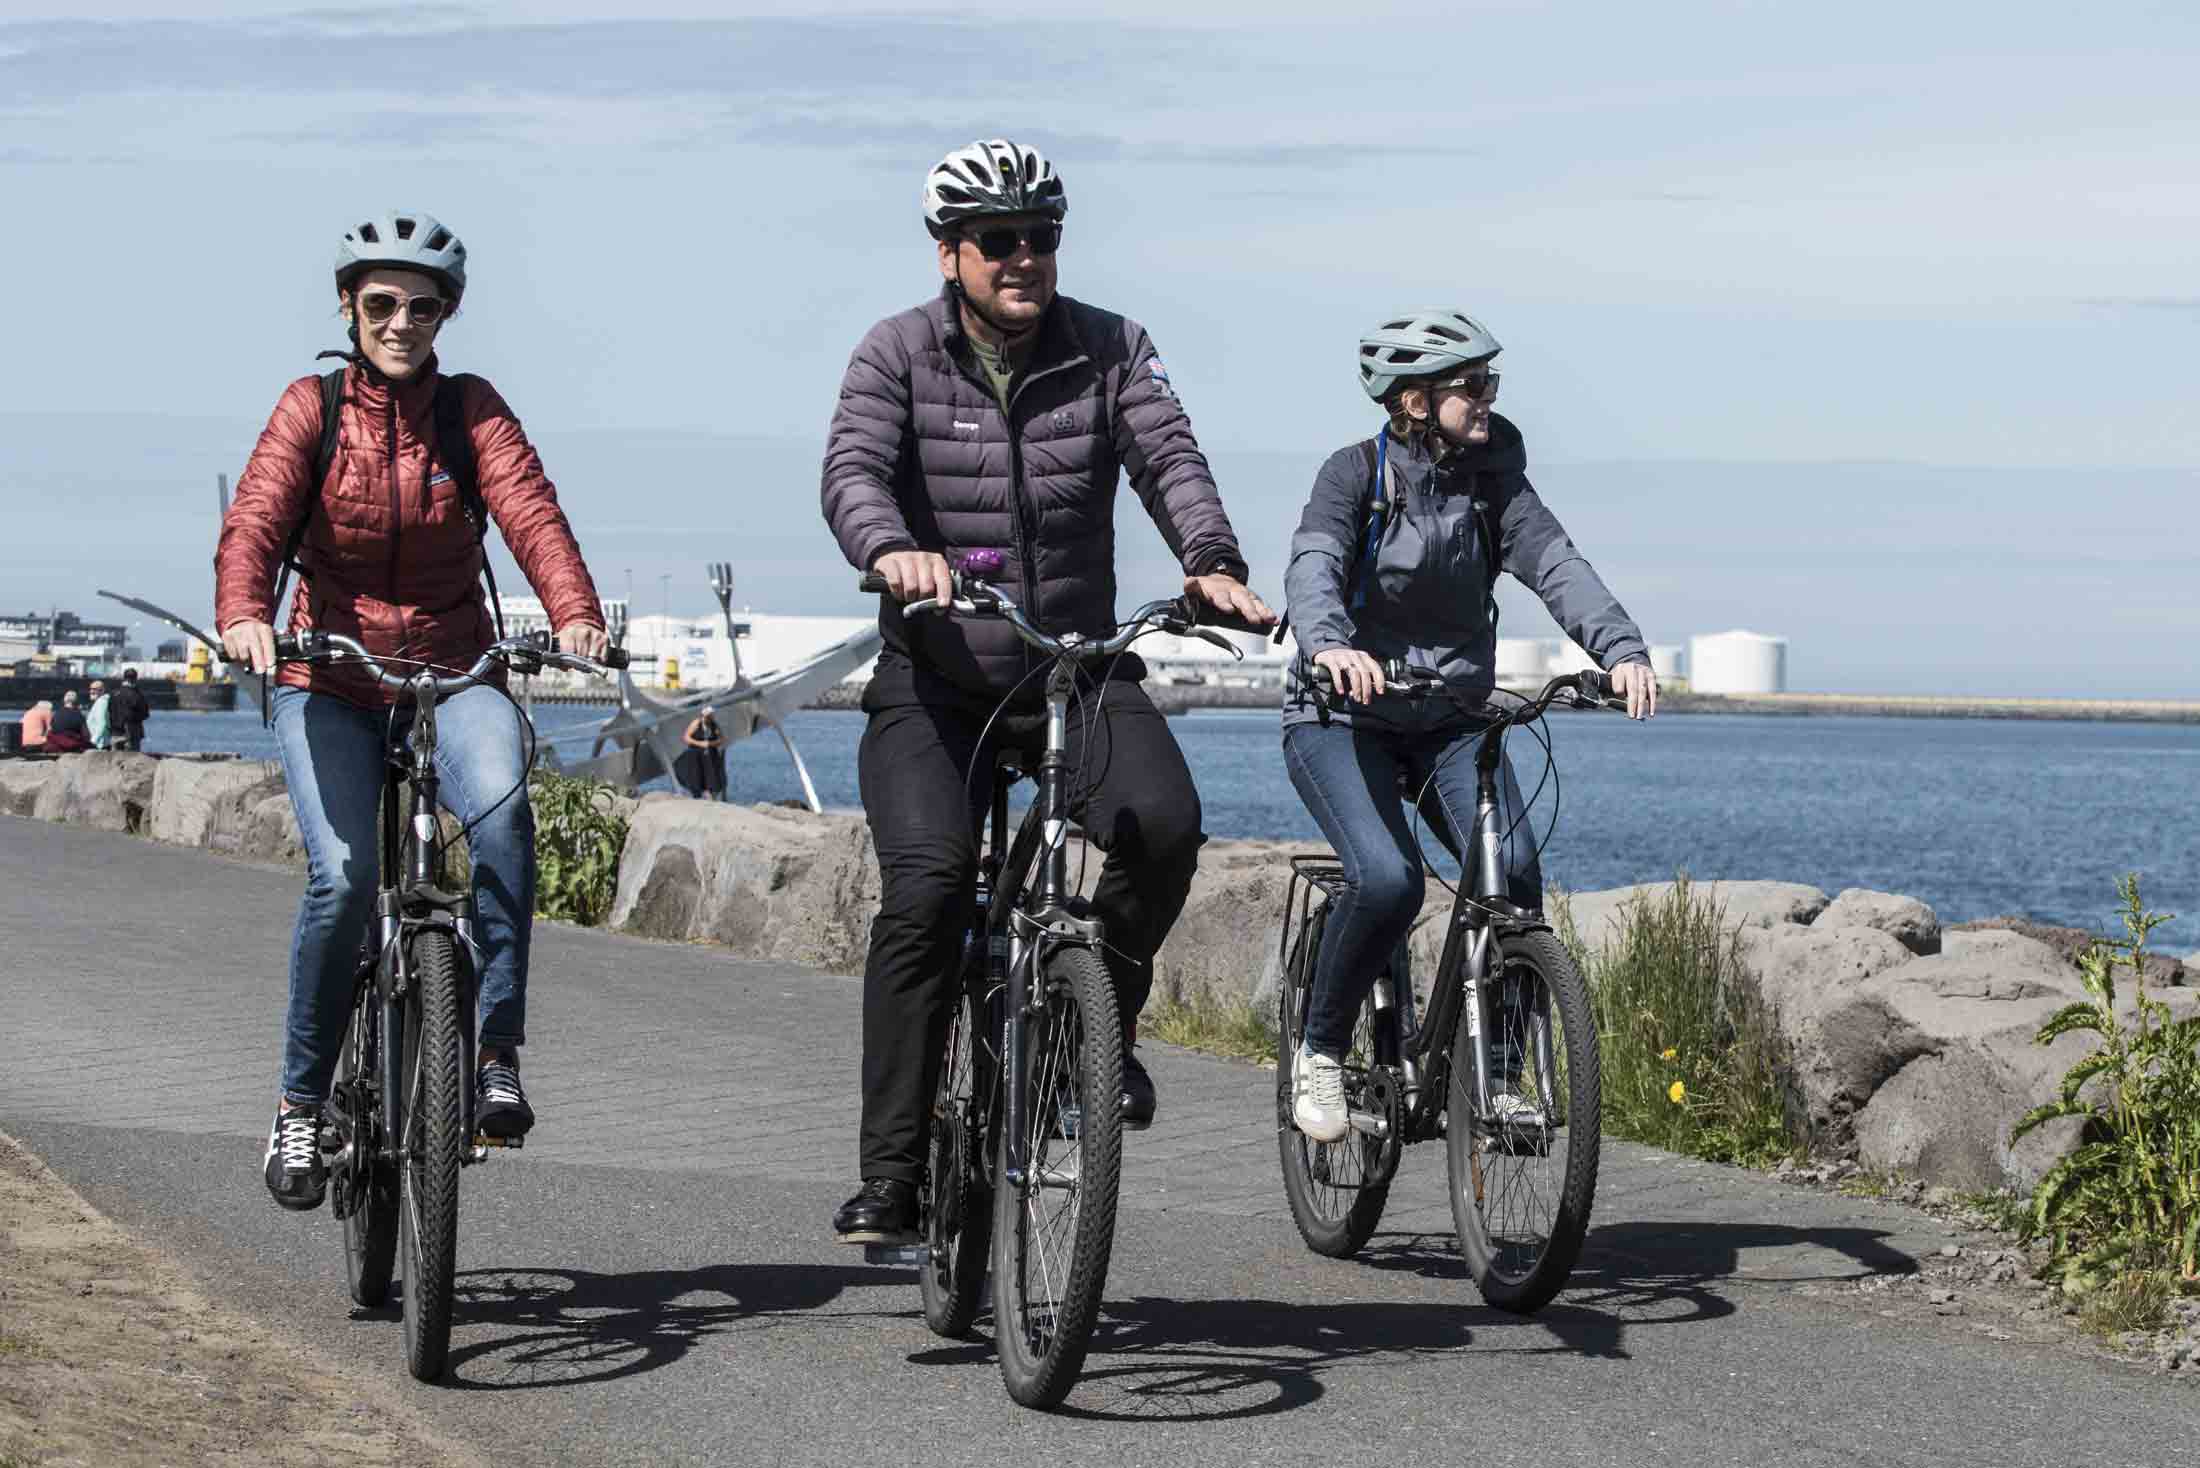 Coast of Reykjavik Bike Tour is a great way to see the hidden nature on the Reykjavik peninsula.